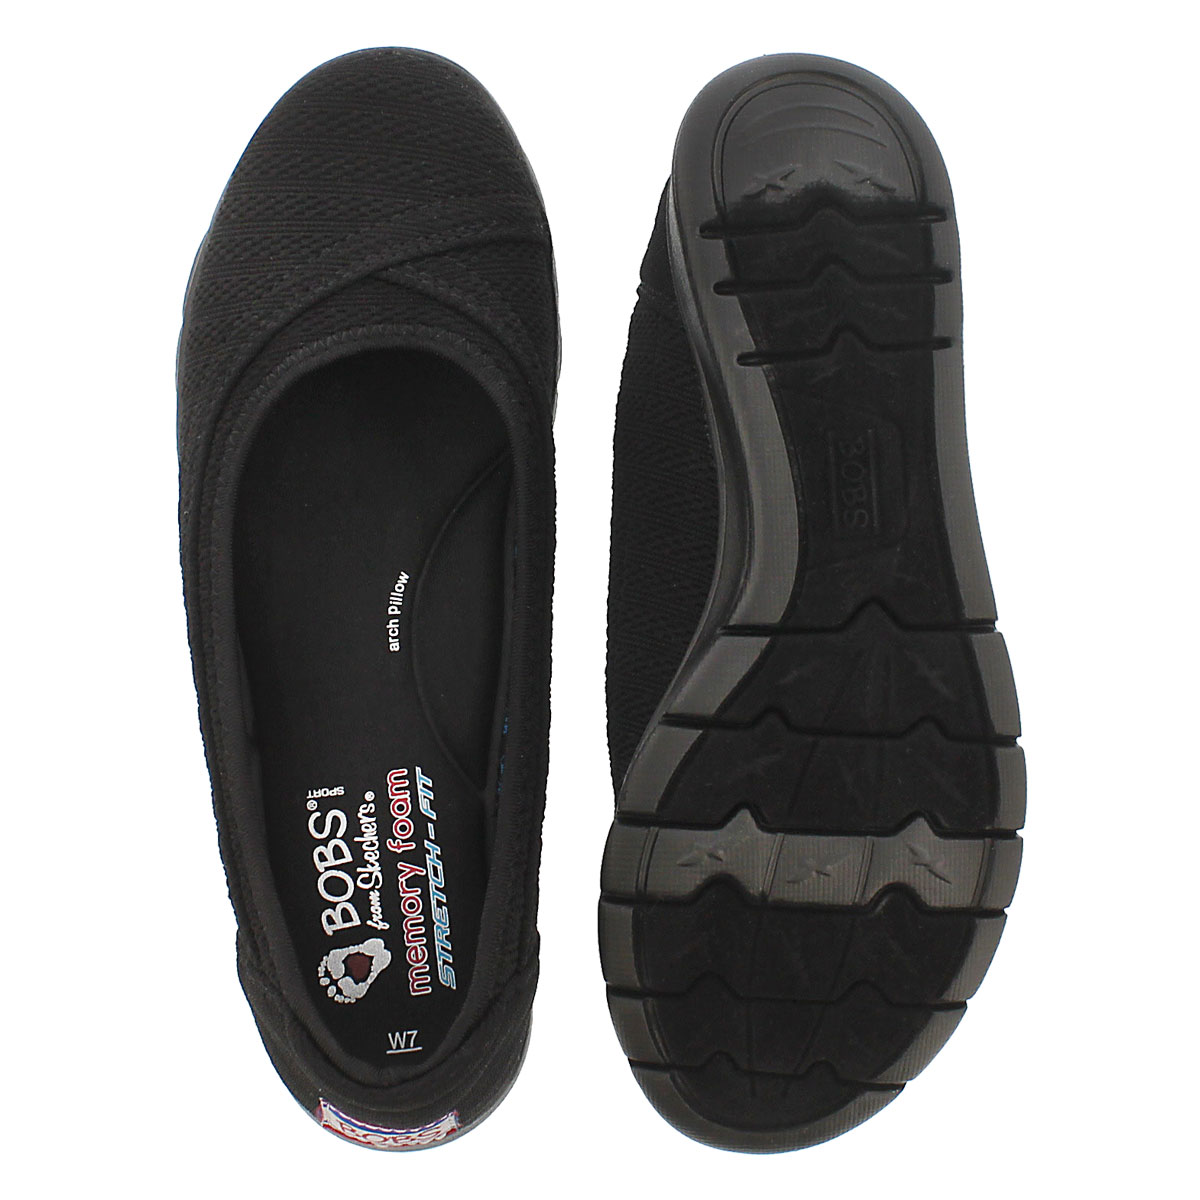 bobs from skechers with memory foam